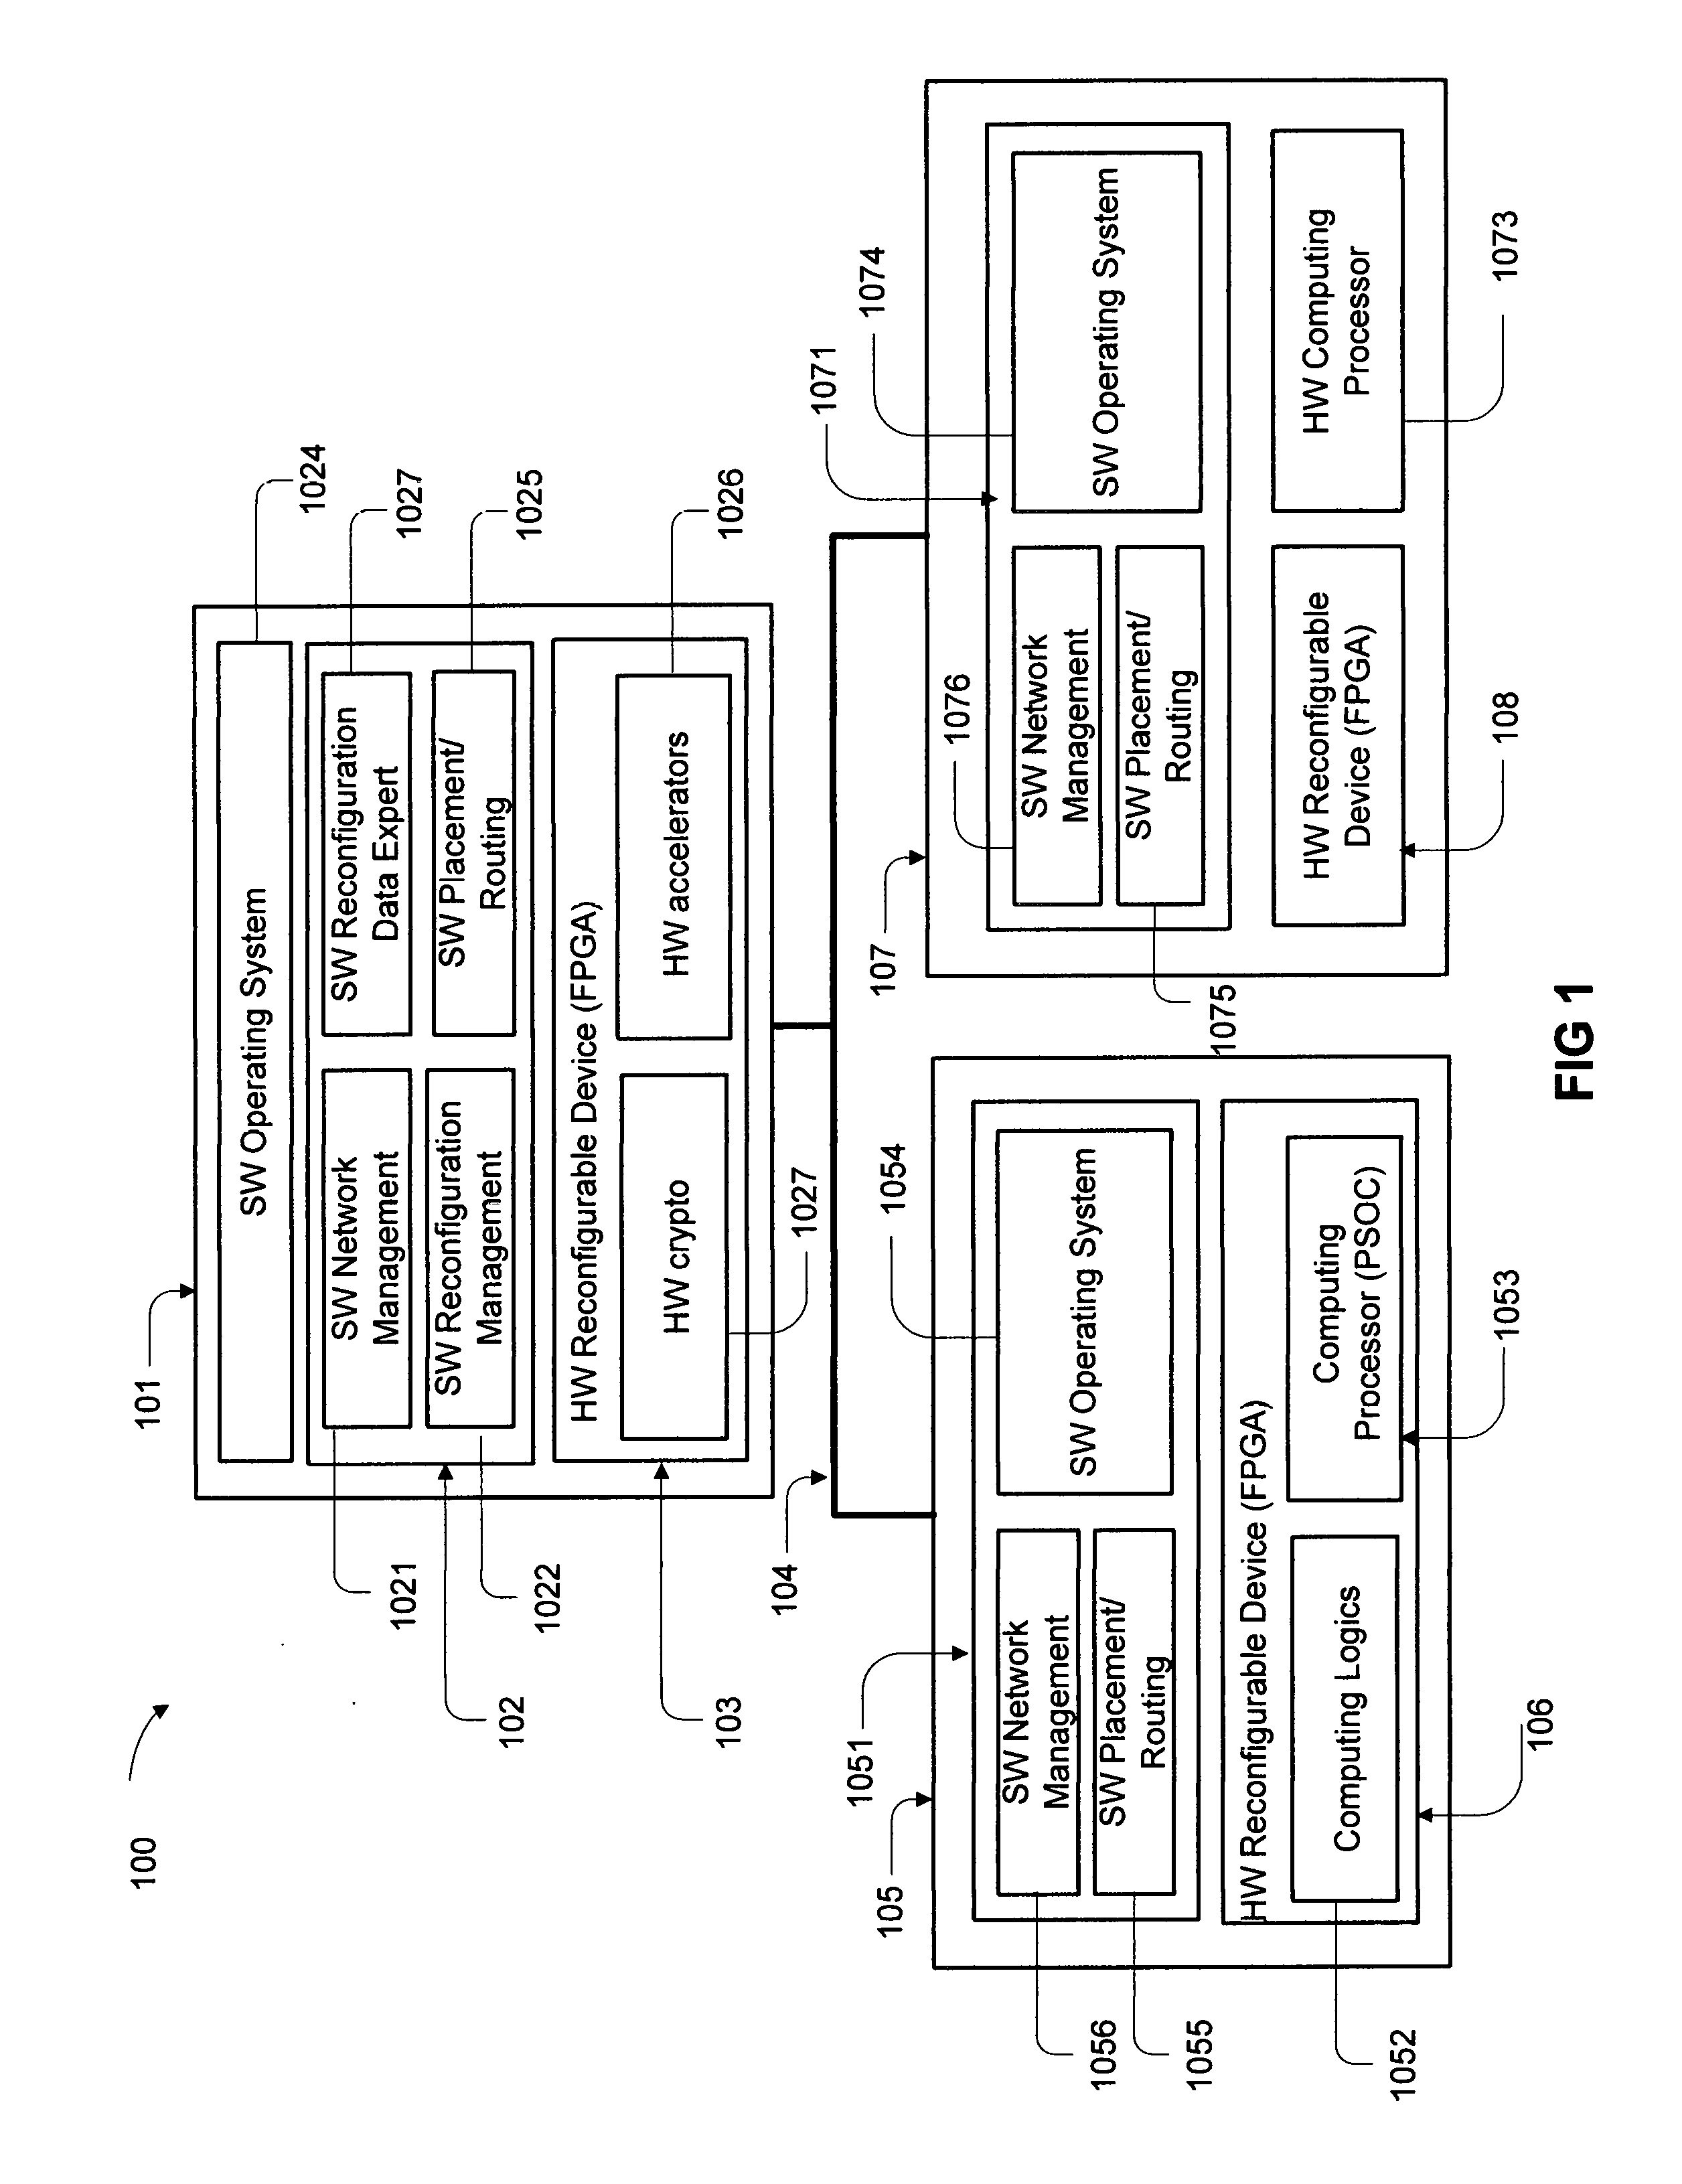 Embedded systems of internet-of-things incorporating a cloud computing service of FPGA reconfiguration